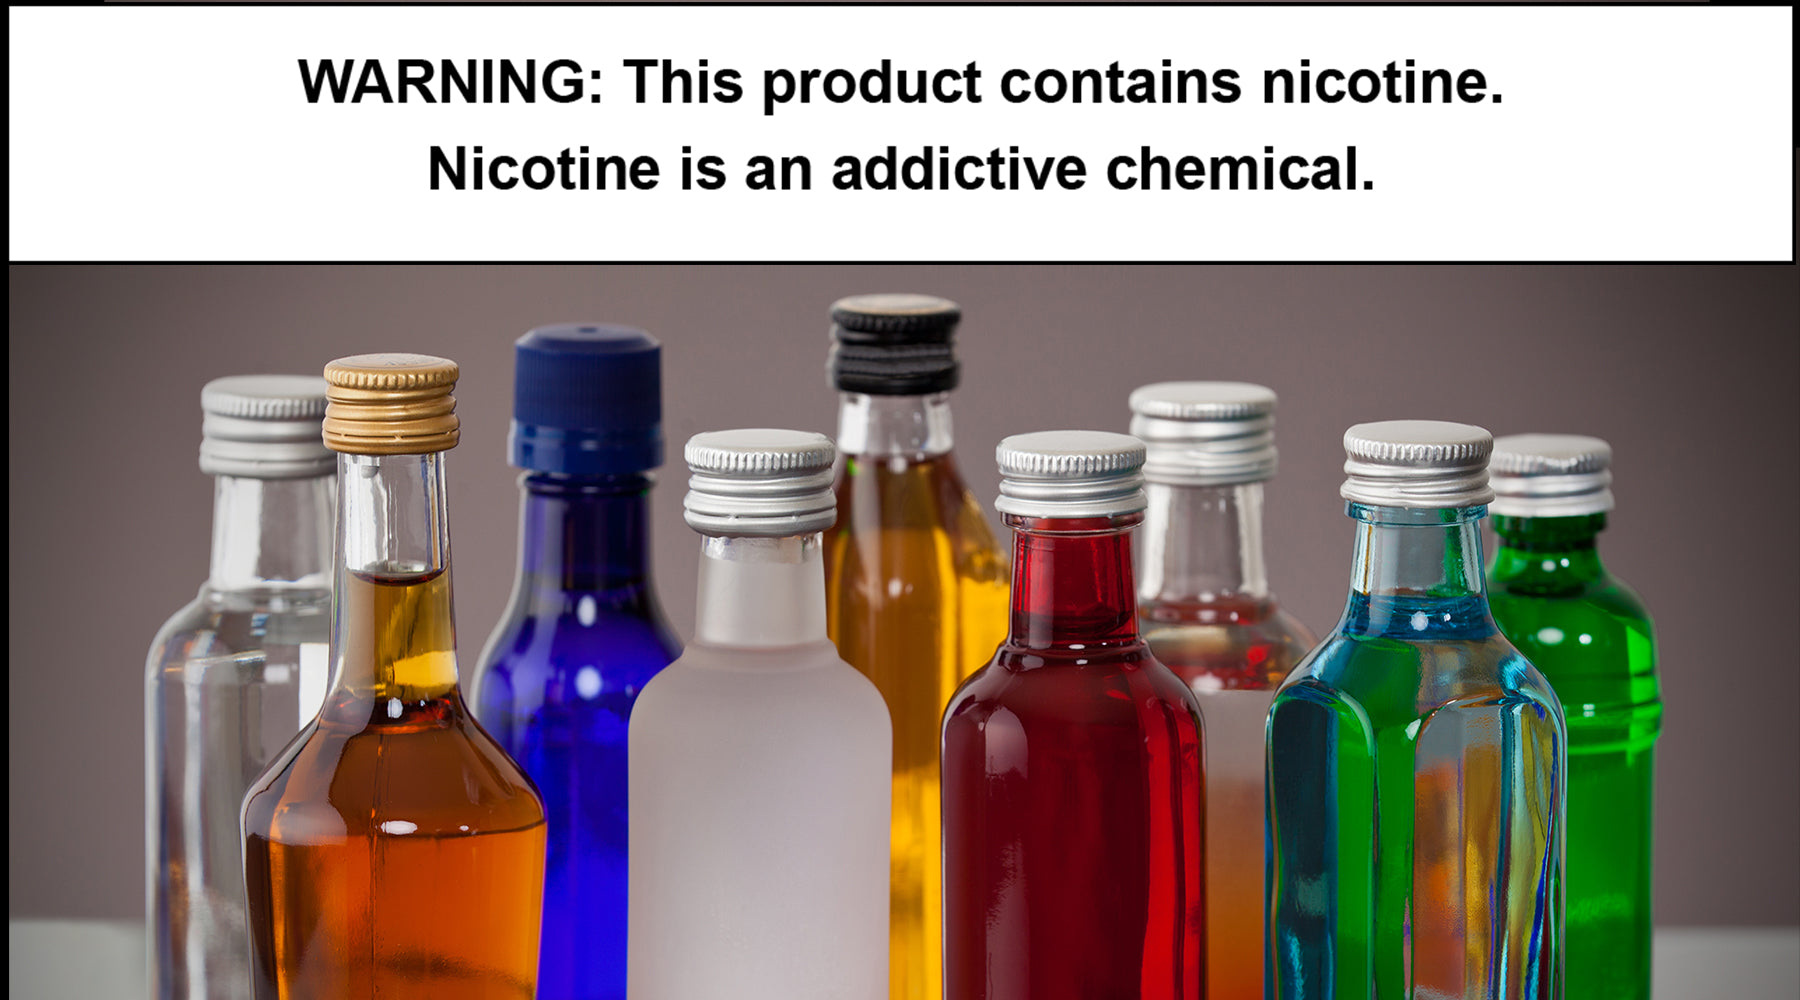 FDA Flavor Ban: Vape flavors targeted, what about Alcohol?